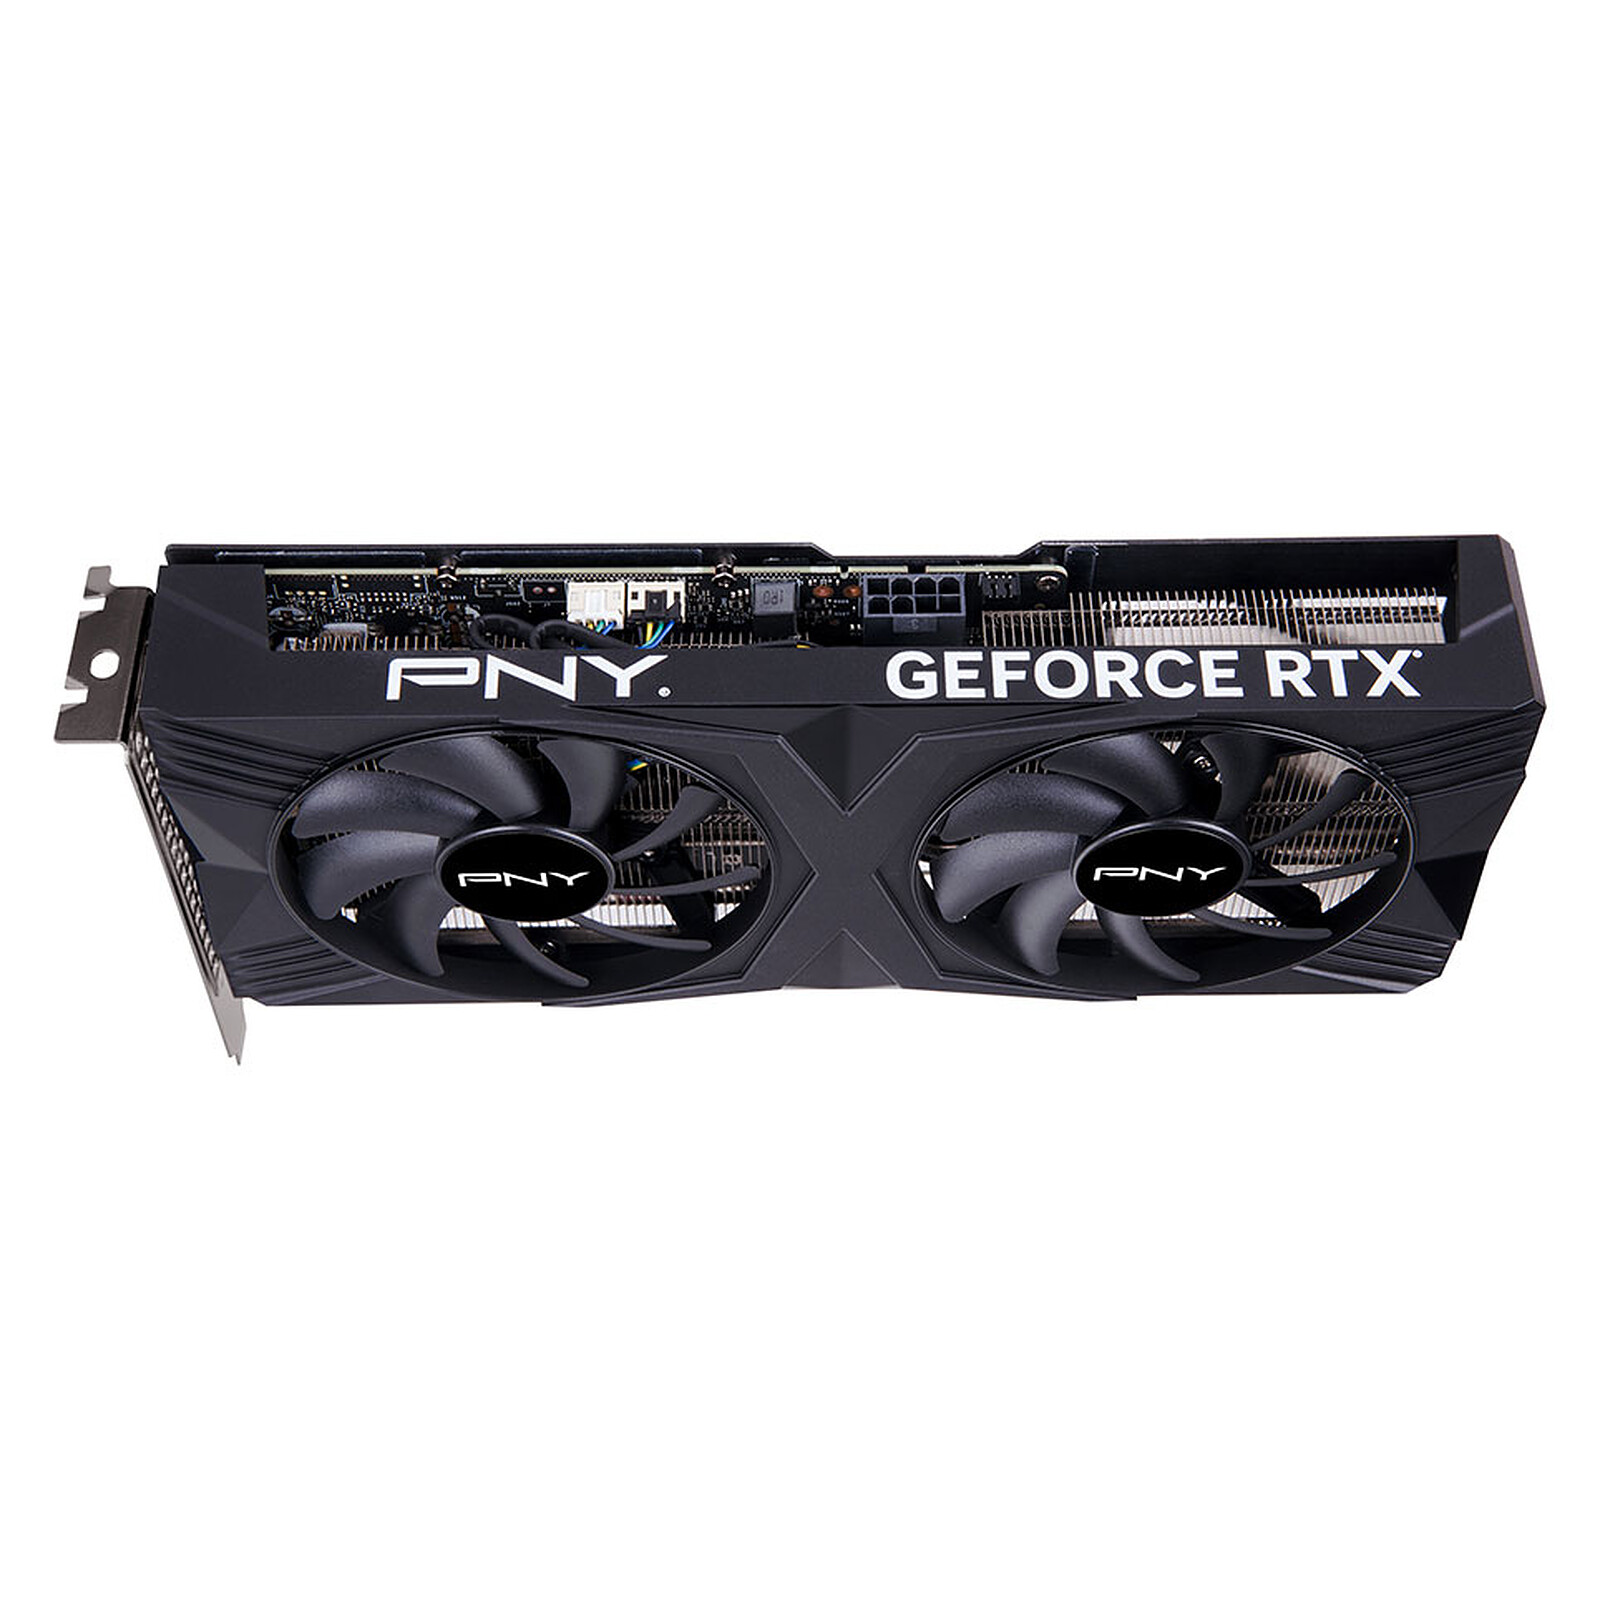 PNY GeForce RTX 4070 Review